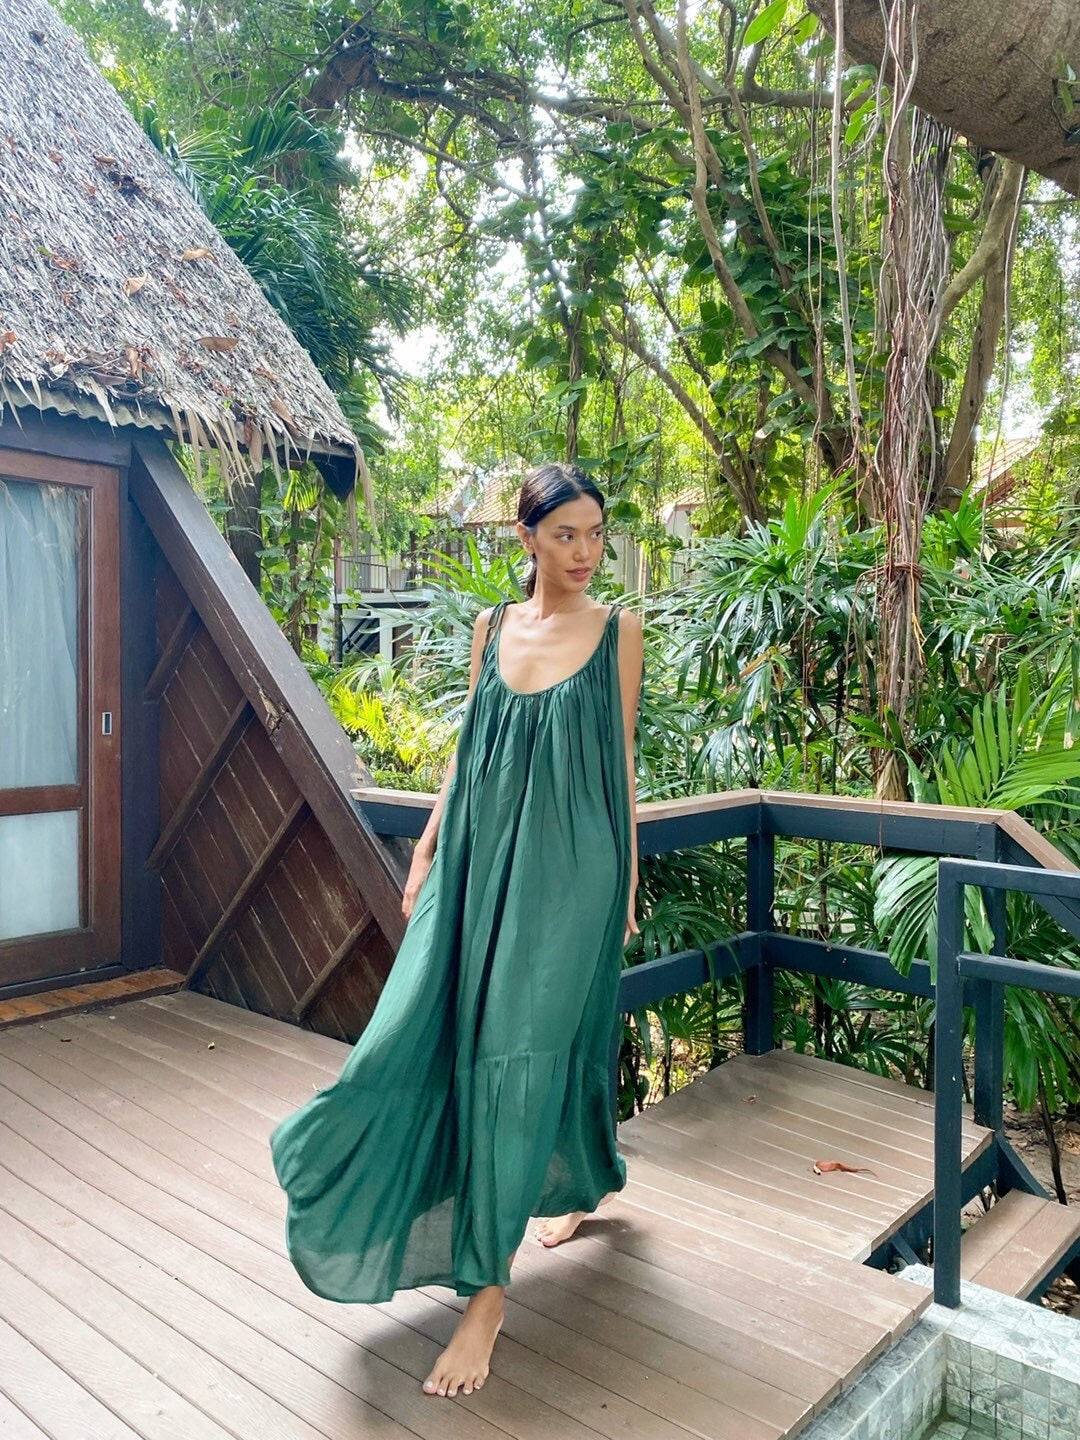 Unleash your inner fashionista with our Green Backless Maxi Dress from Mali - Shop now and stun the crowd!